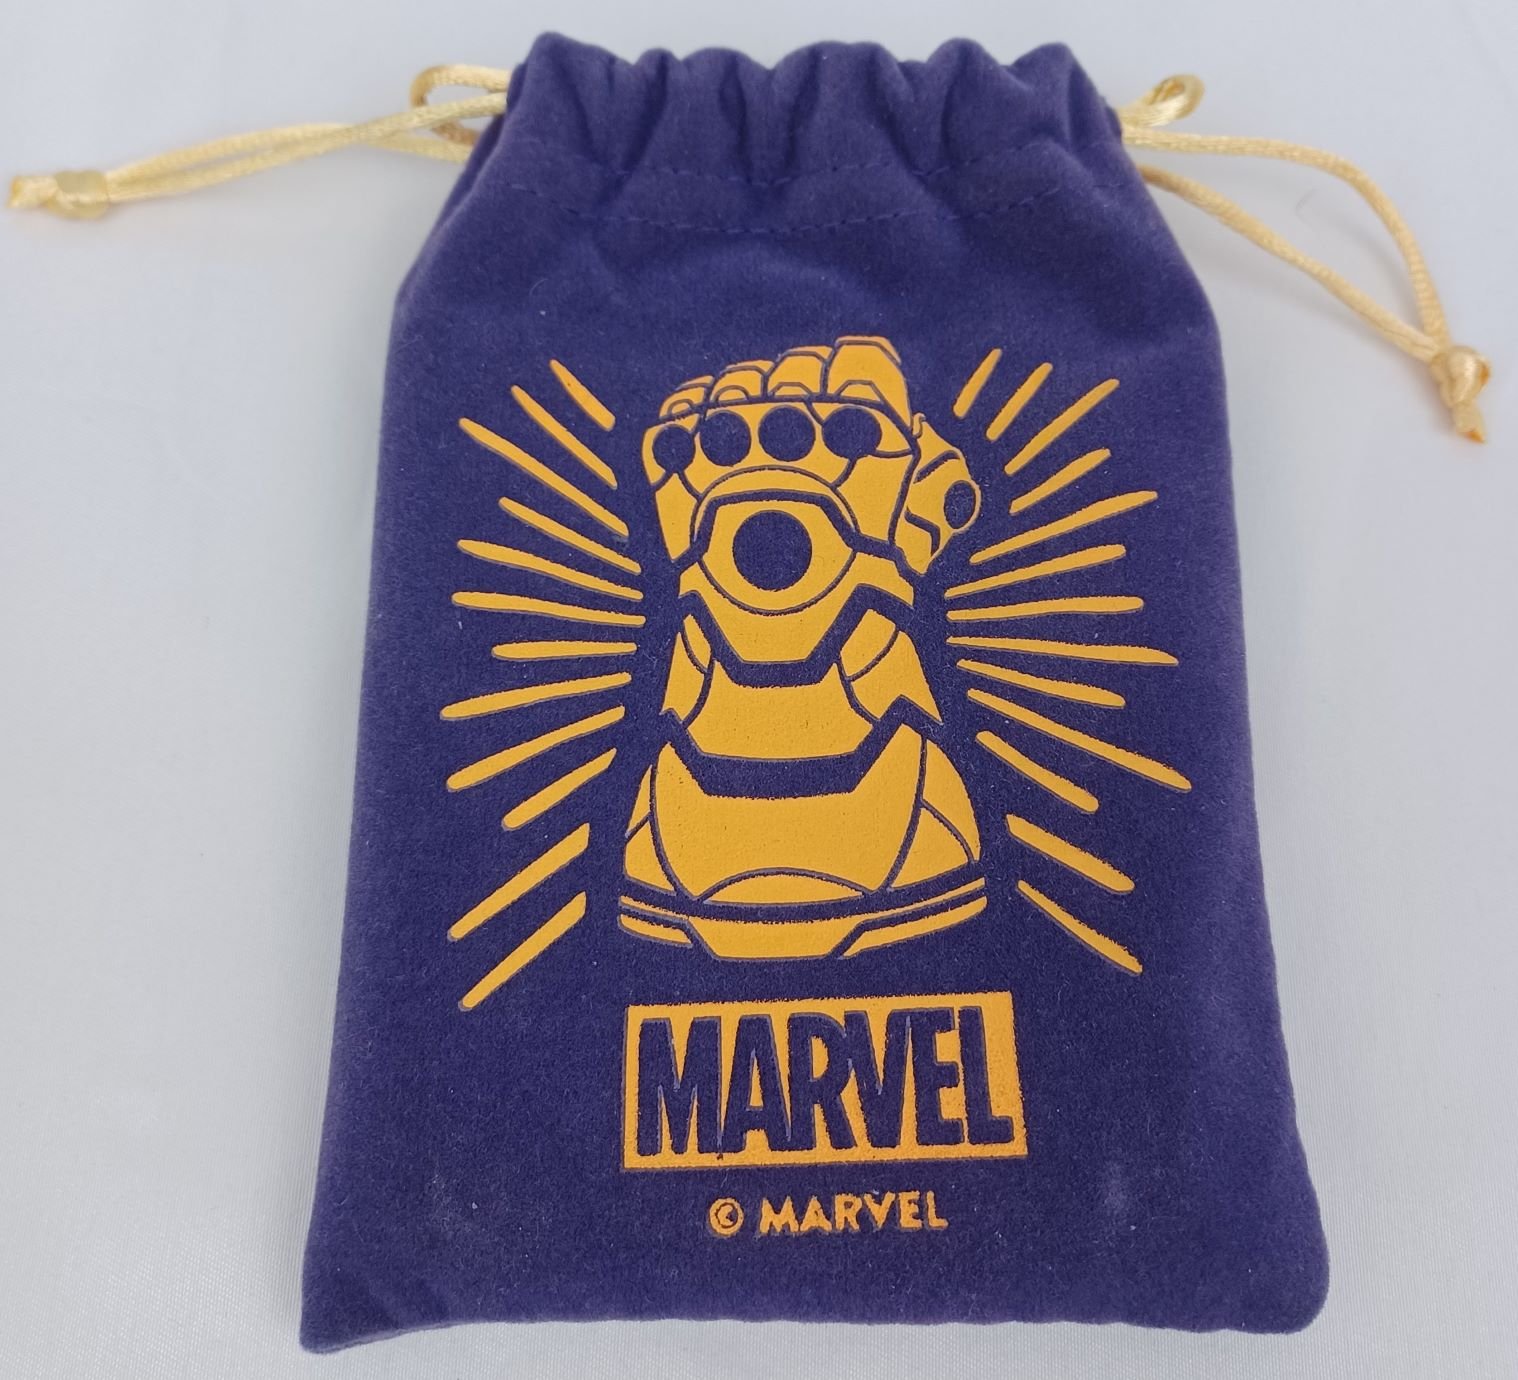 How to Play Marvel Infinity Gauntlet: A Love Letter Game (Review and Rules)